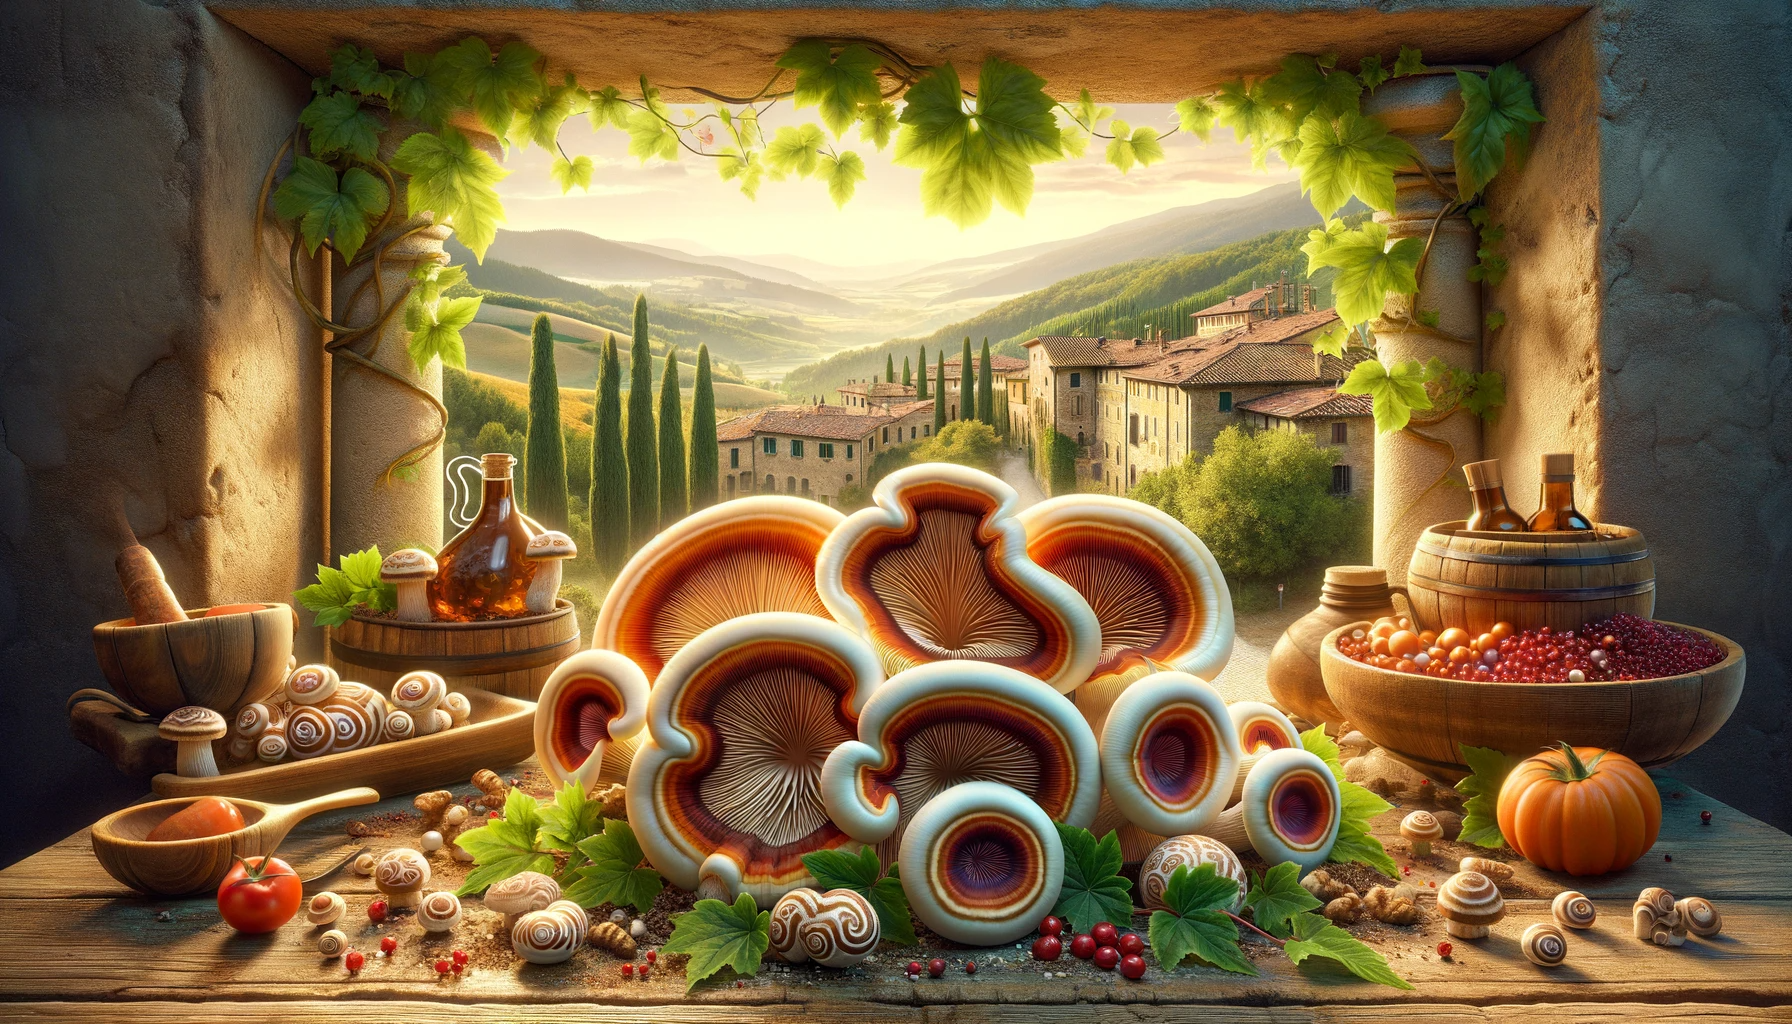 Turkey Tail Mushroom for Immune Support in Italy